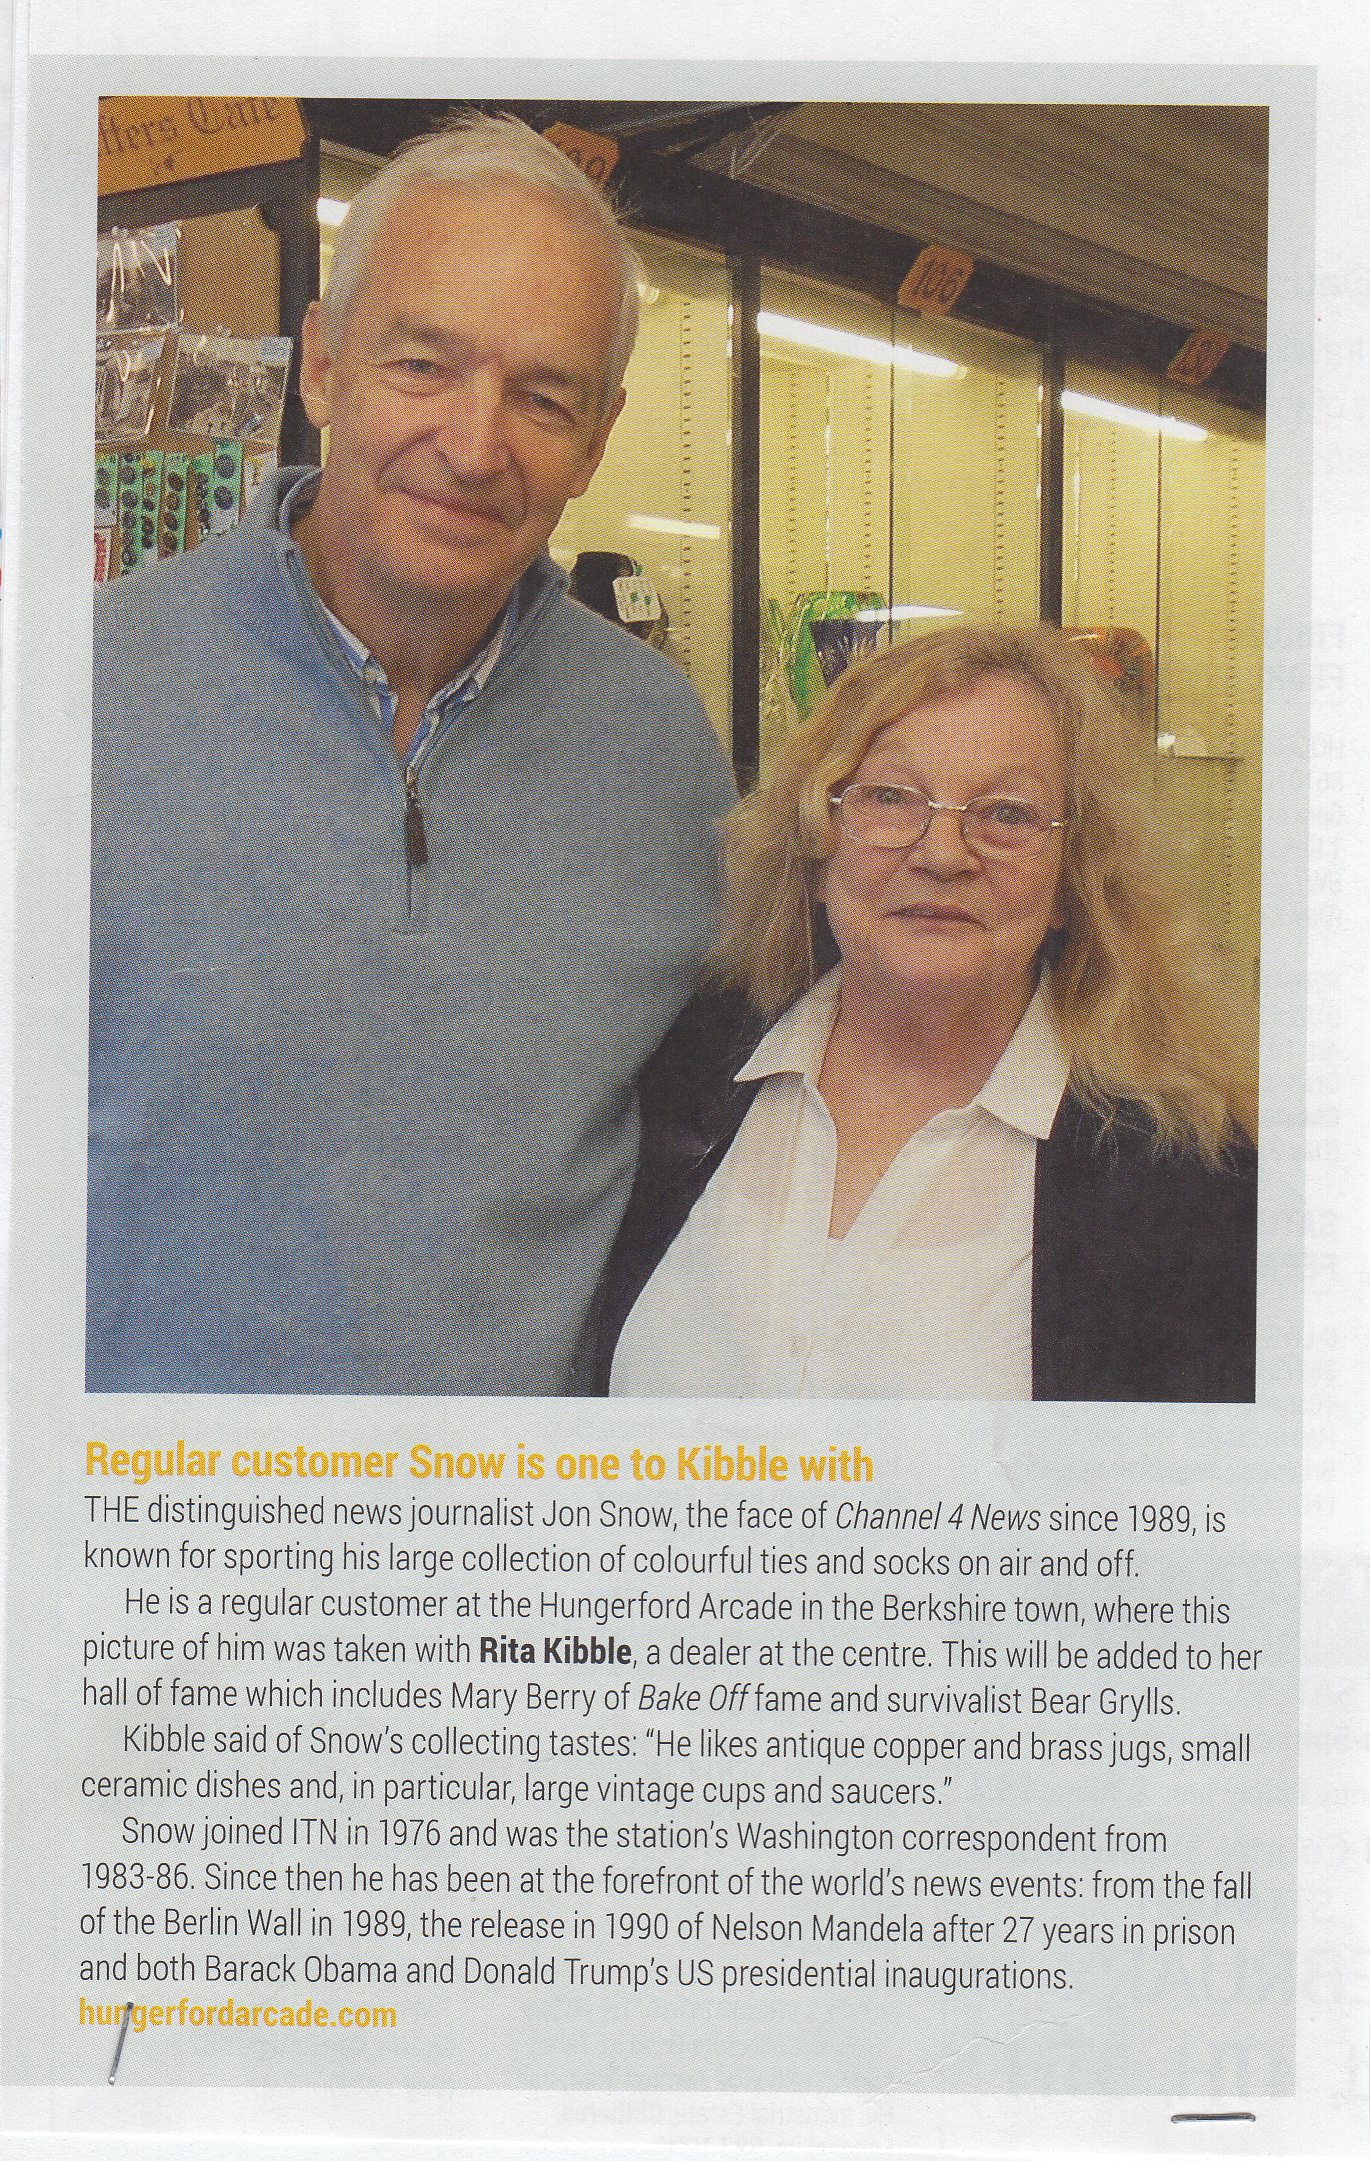 Jon Snow at Hungerford Arcade in Antiques Trade Gazette